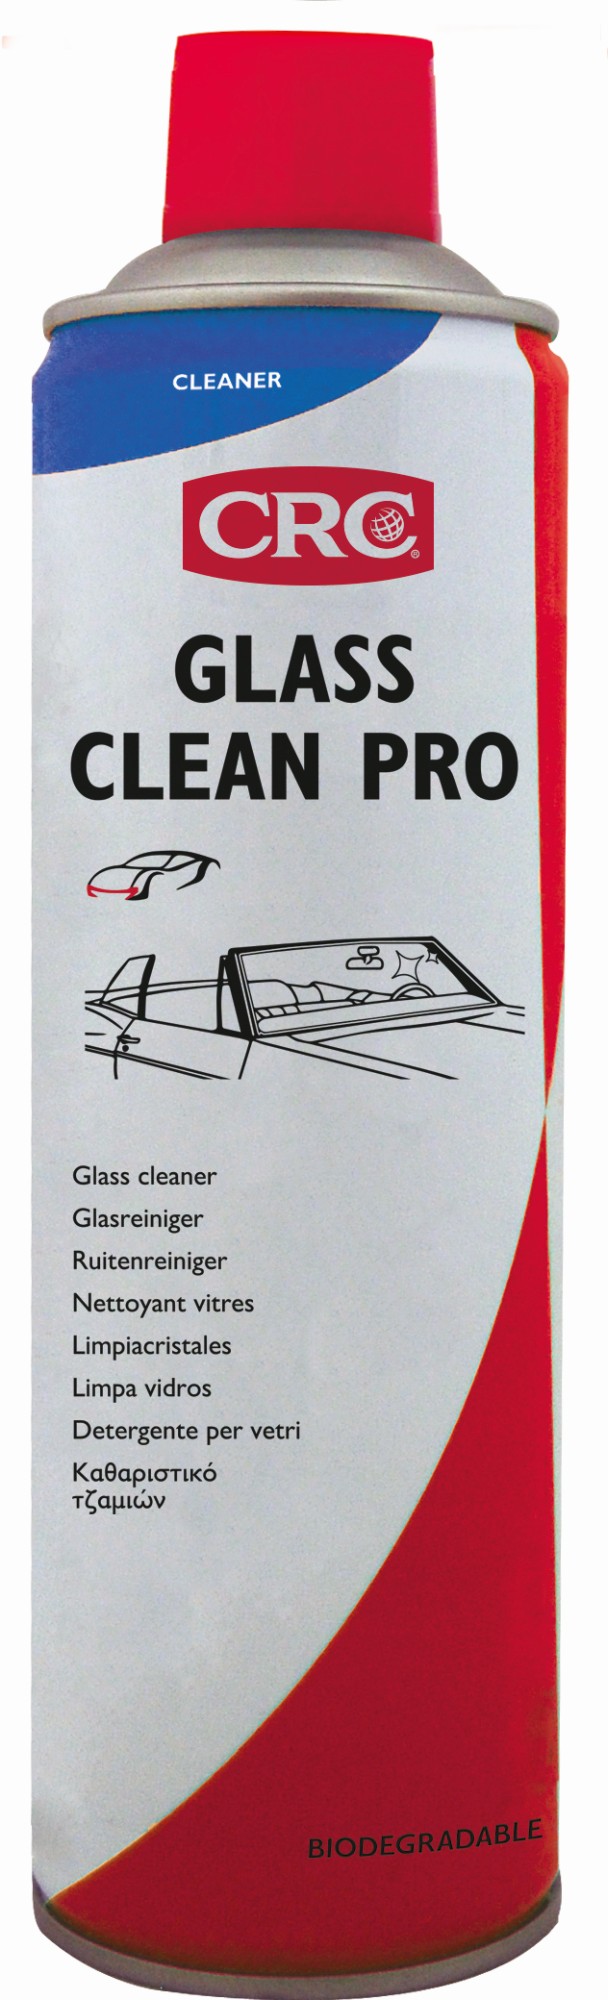 Comprar Cleantle Glass Cleaner2 Limpiacristales biodegradable